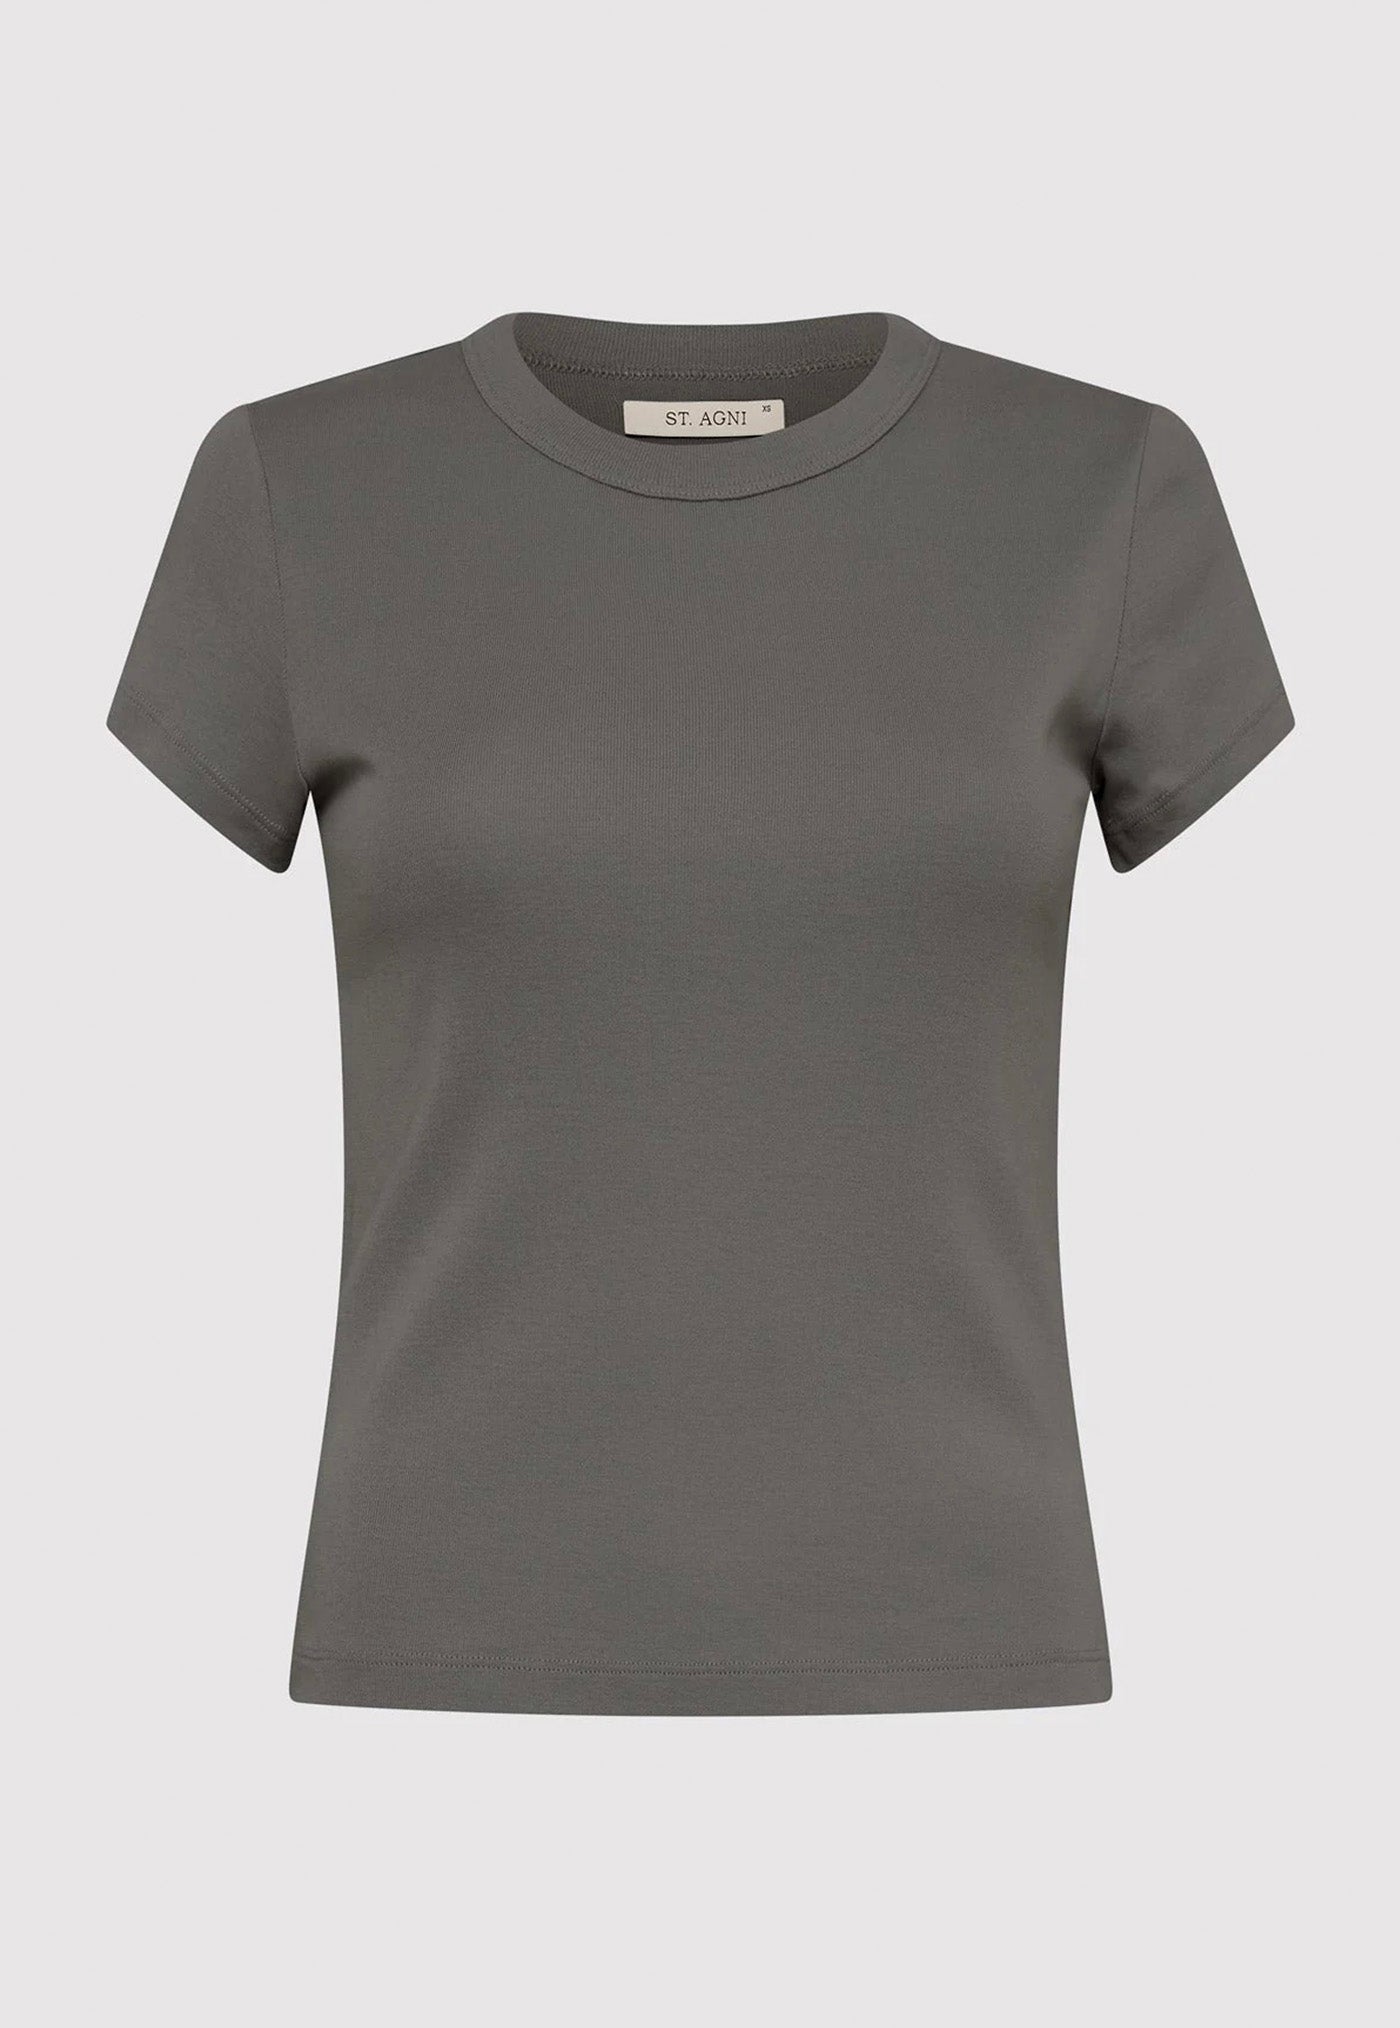 Organic Cotton Baby Tee - Pewter Grey sold by Angel Divine